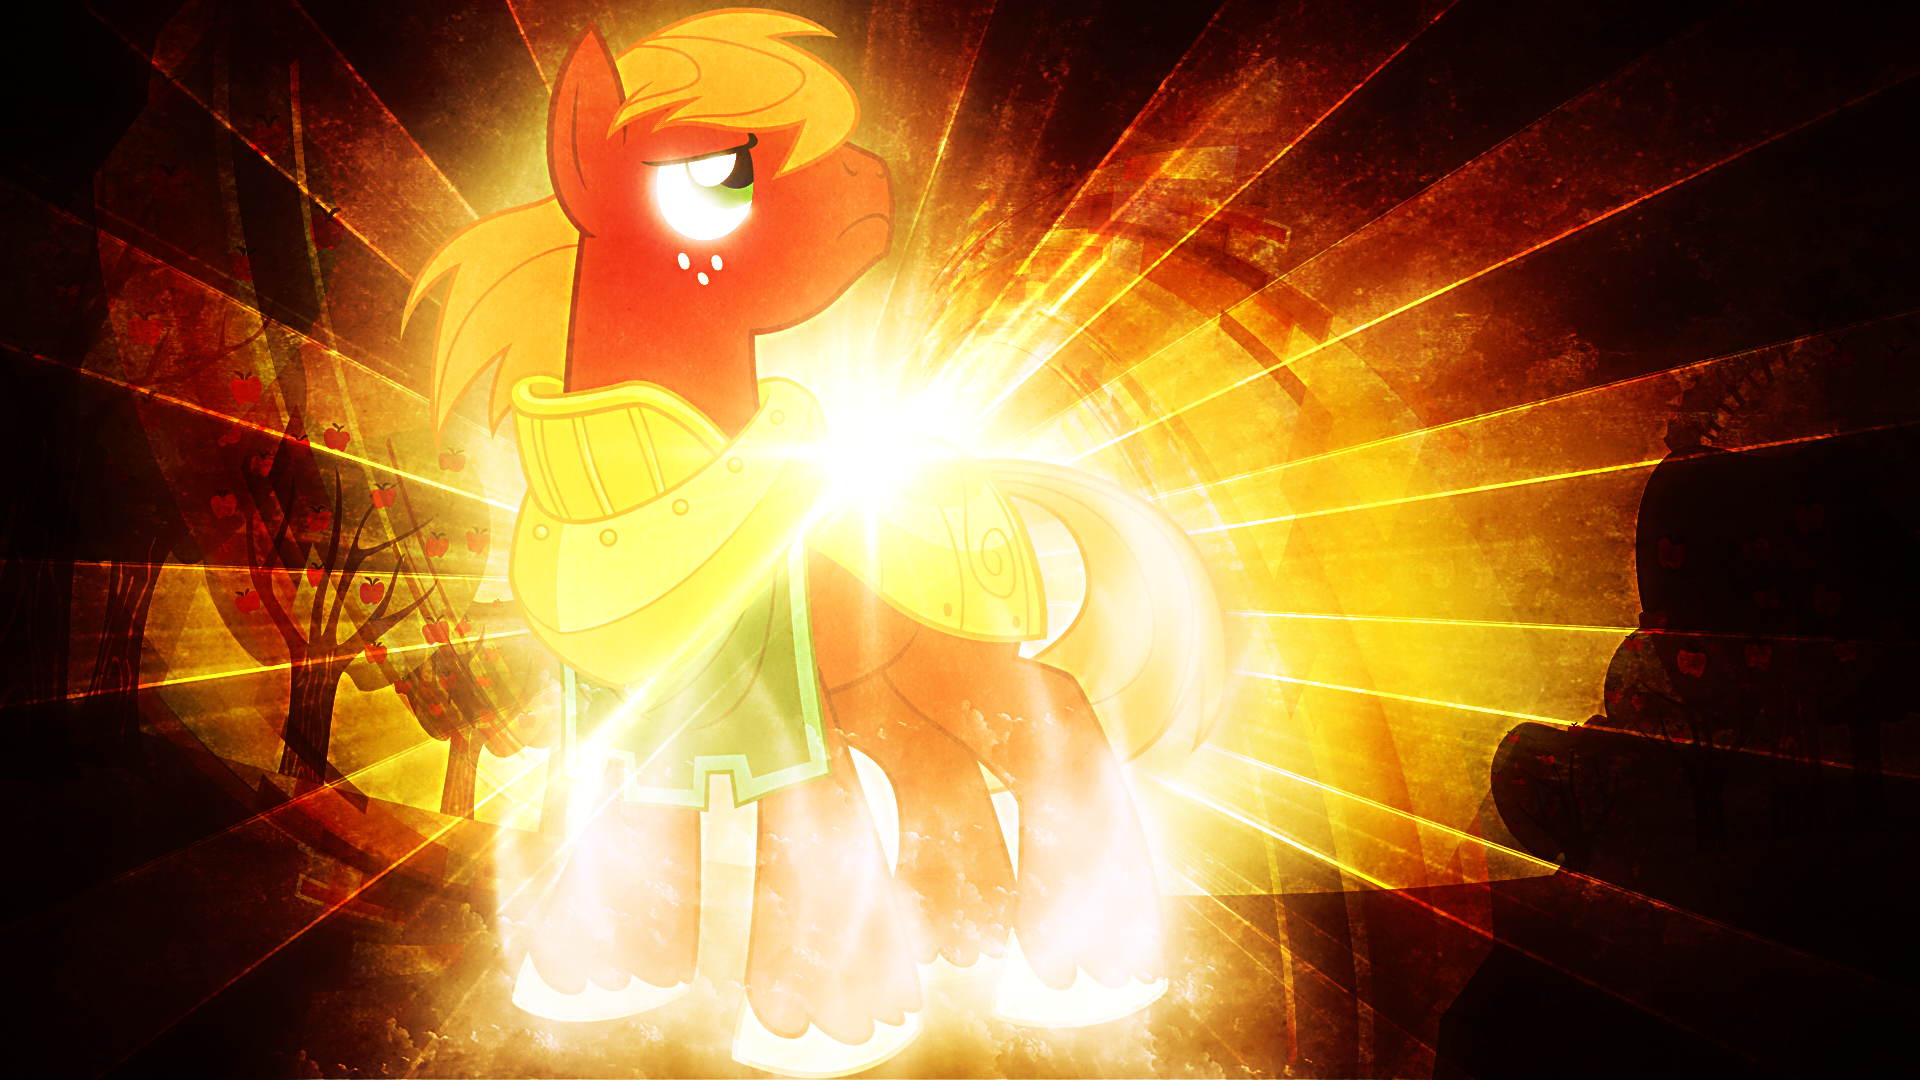 Epic Mac - Wallpaper by BronyB34r, Equestria-Prevails and Tzolkine